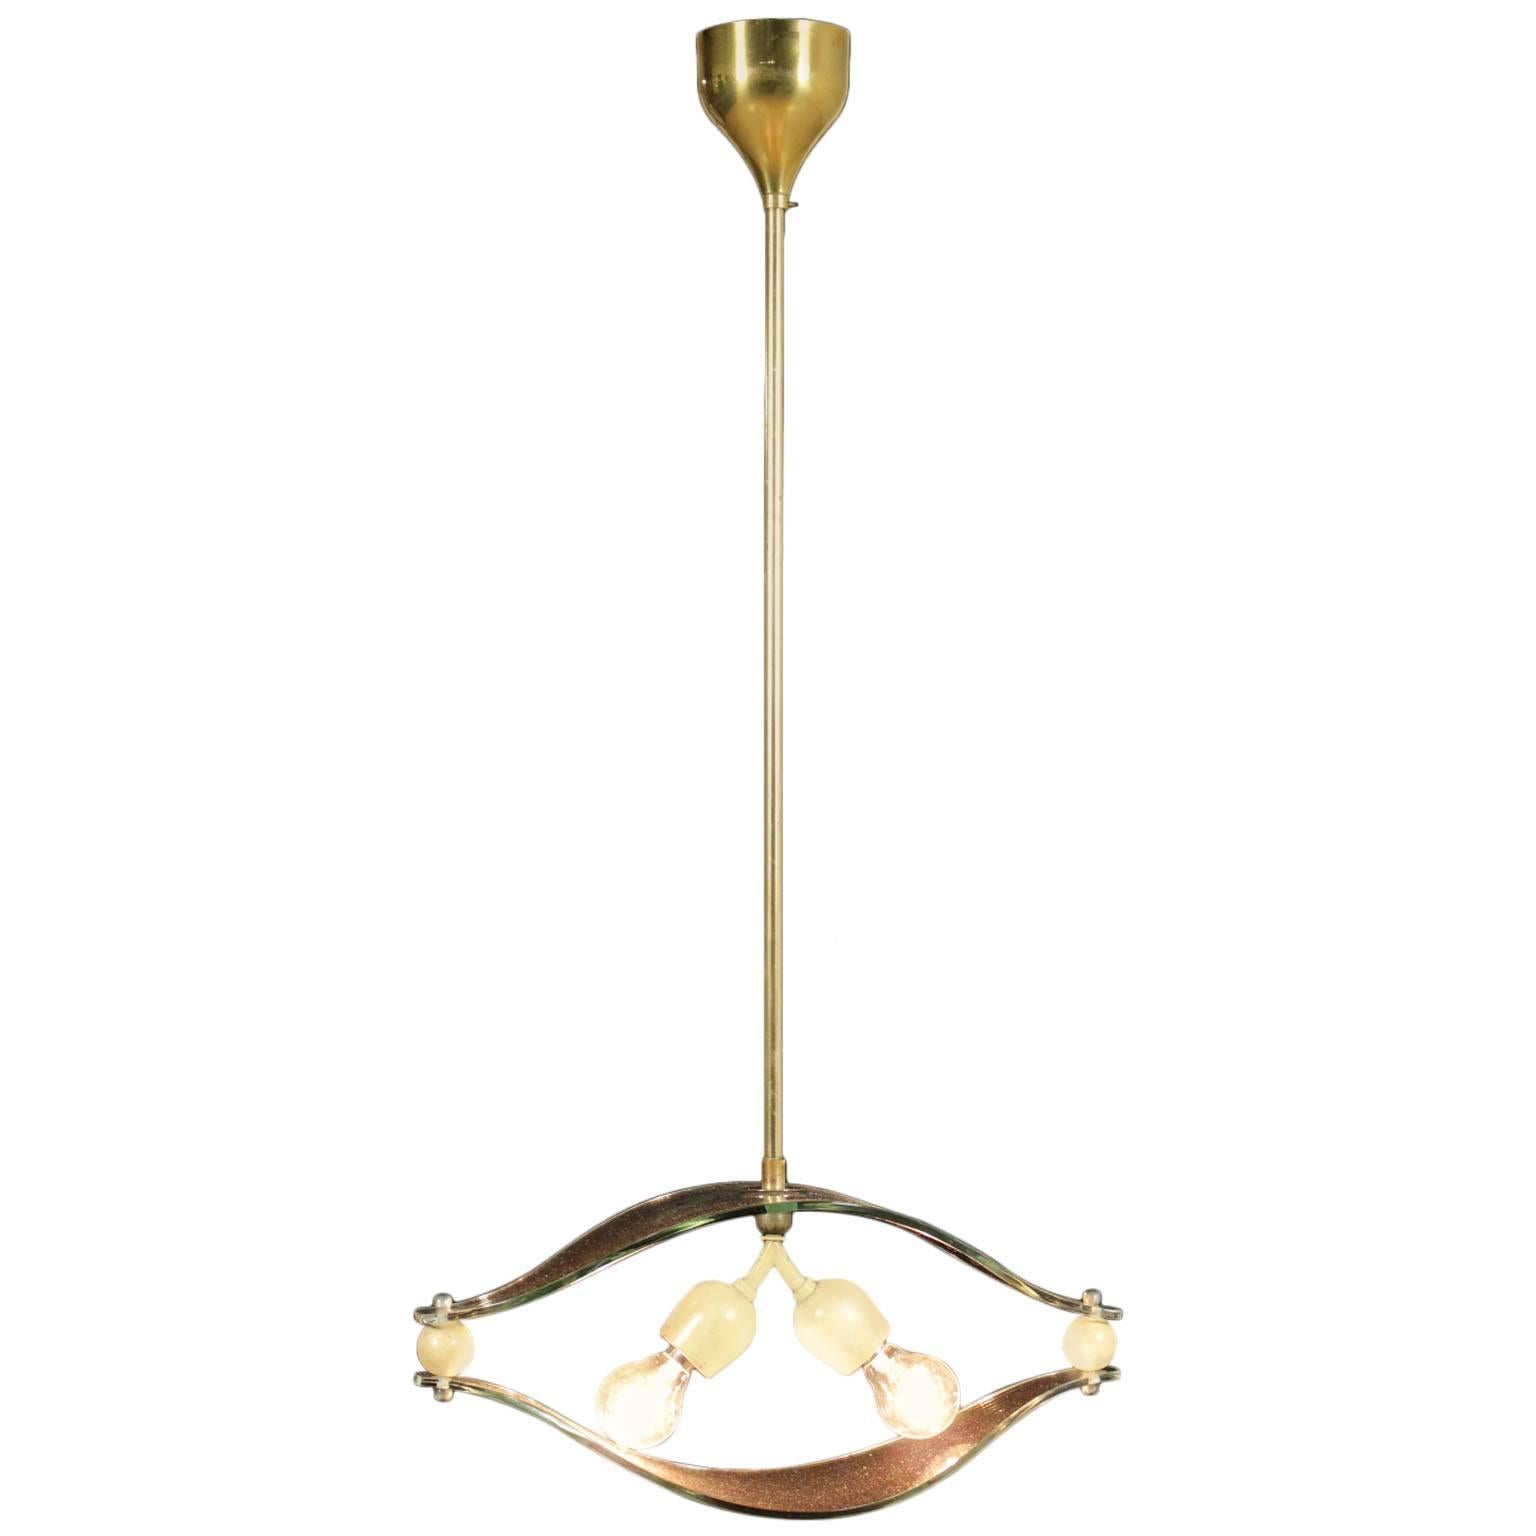 Brass and Glass Hanging Lamp Vintage Manufactured in Italy, 1950s